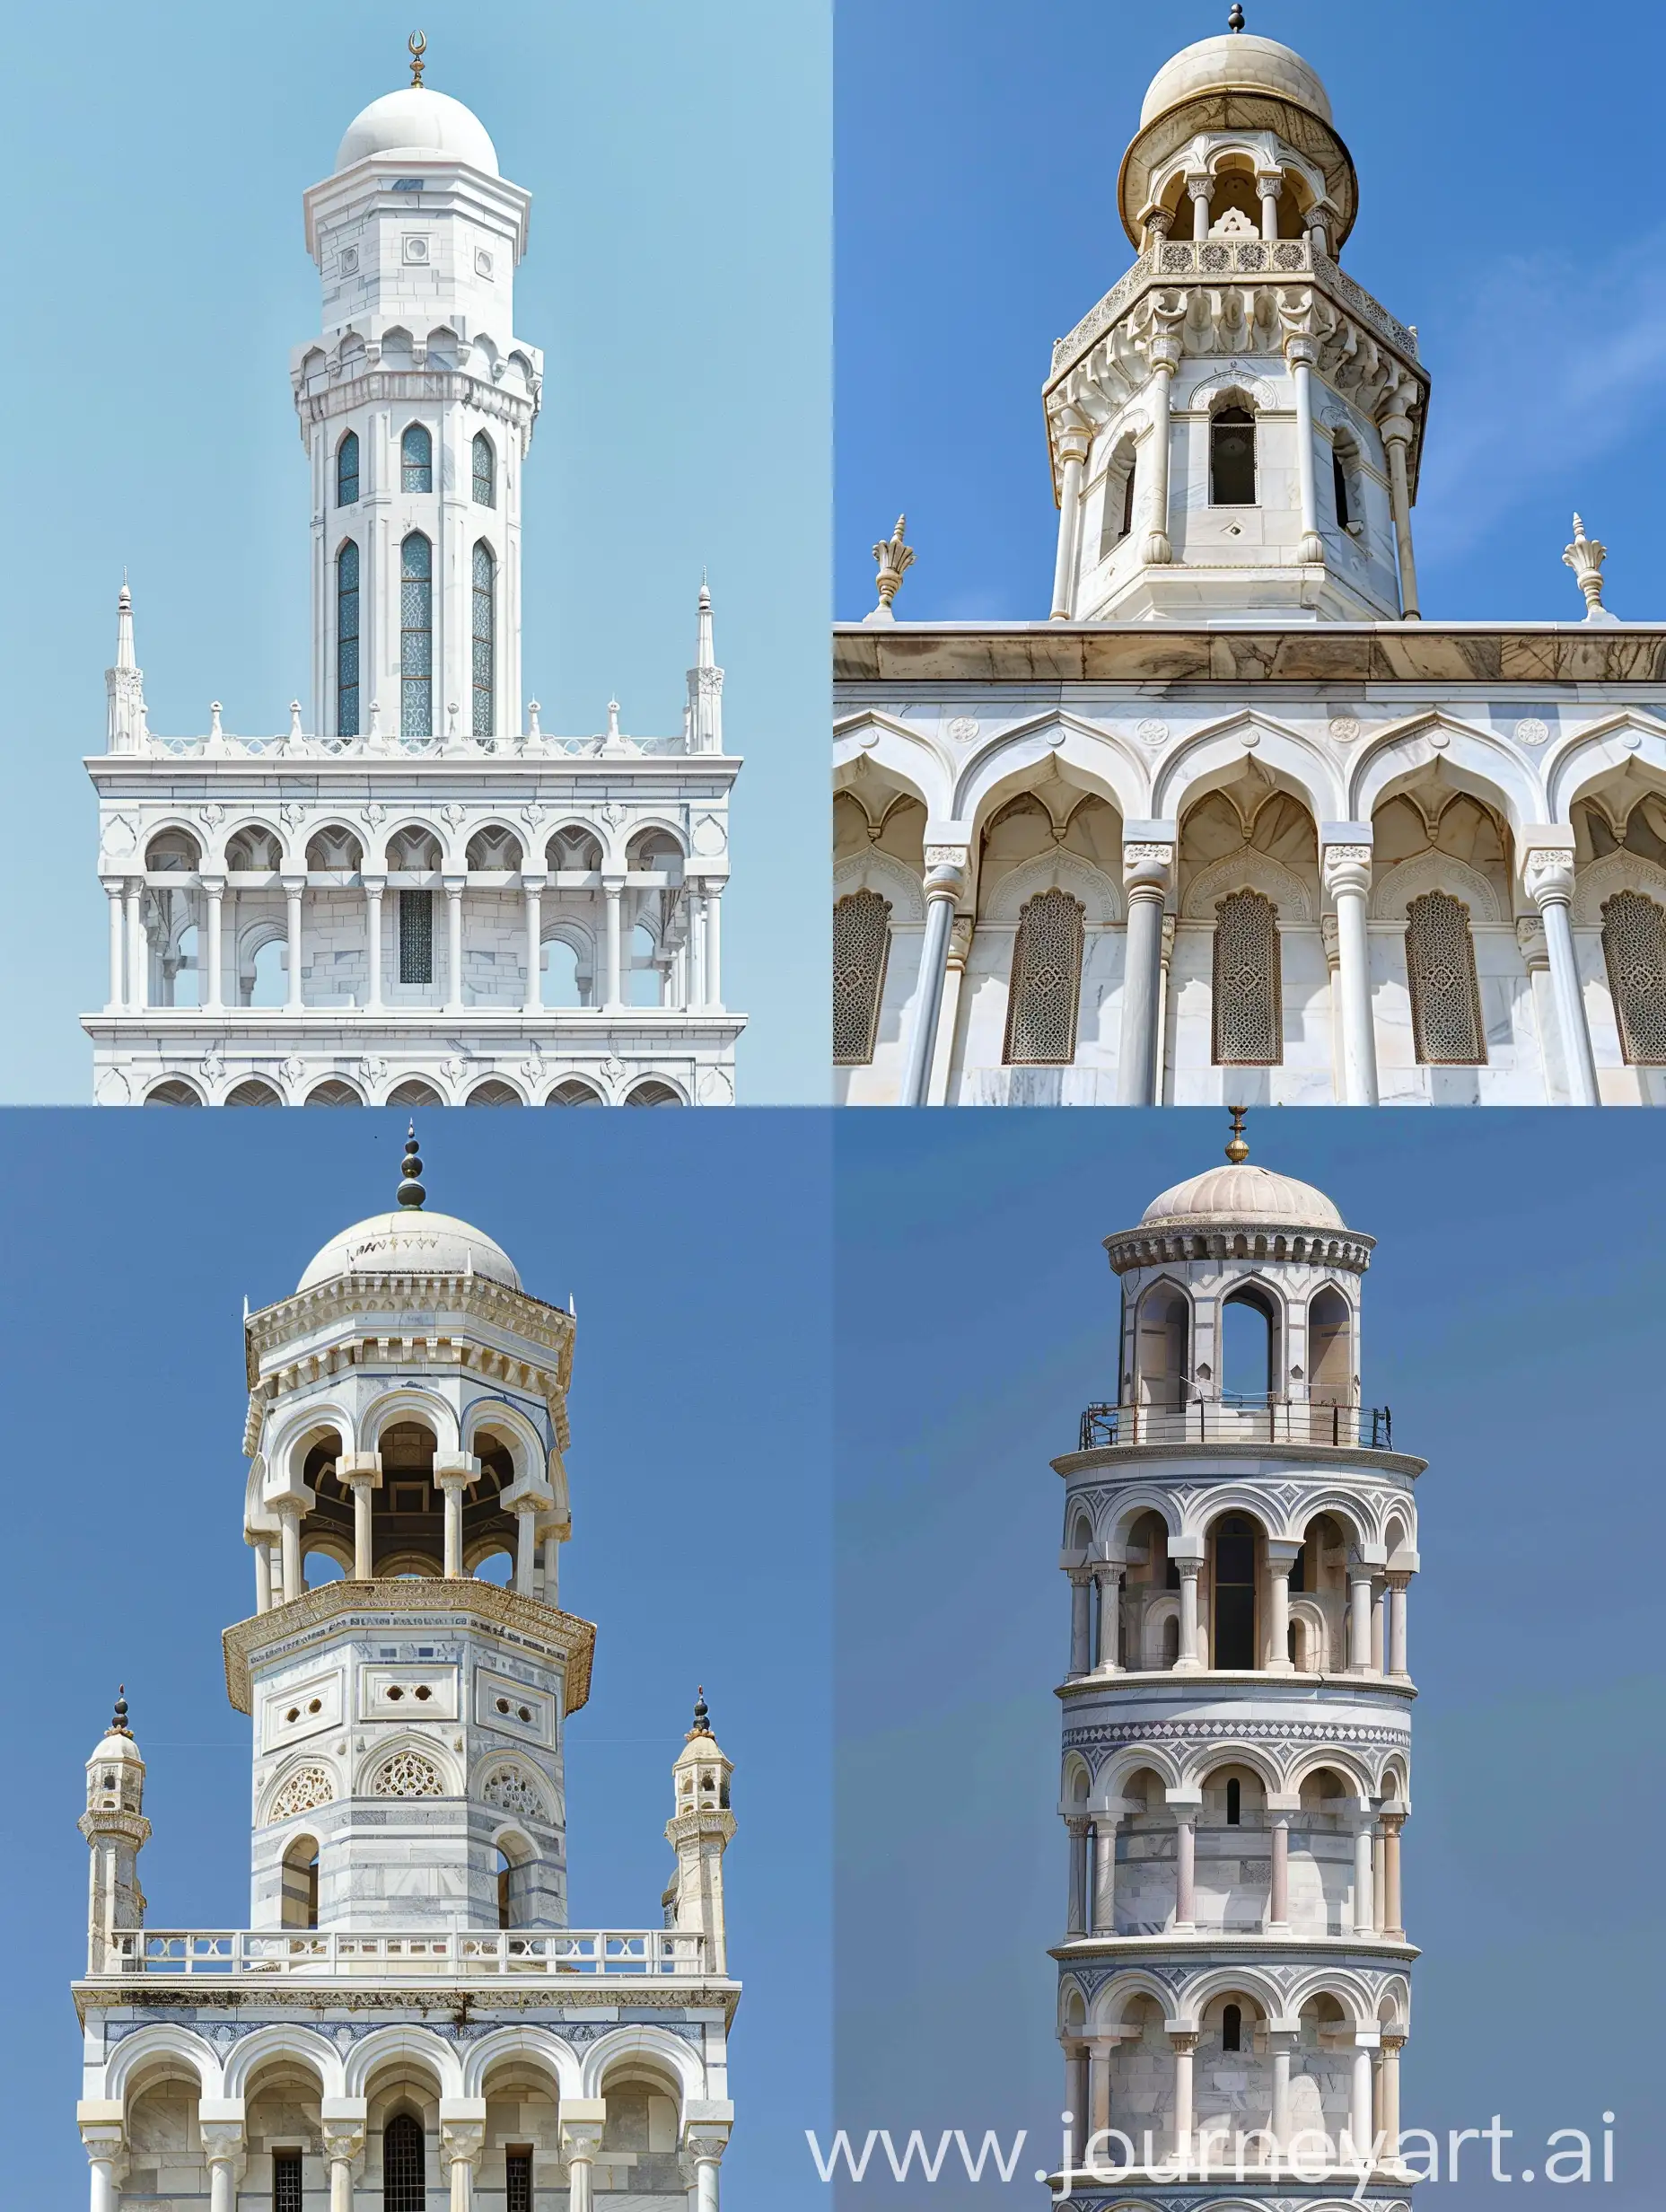 Mughal minaret influenced Leaning tower of Pisa, Mughal arches with mughal arched windows, Gurudwara dome at the top, White marbled